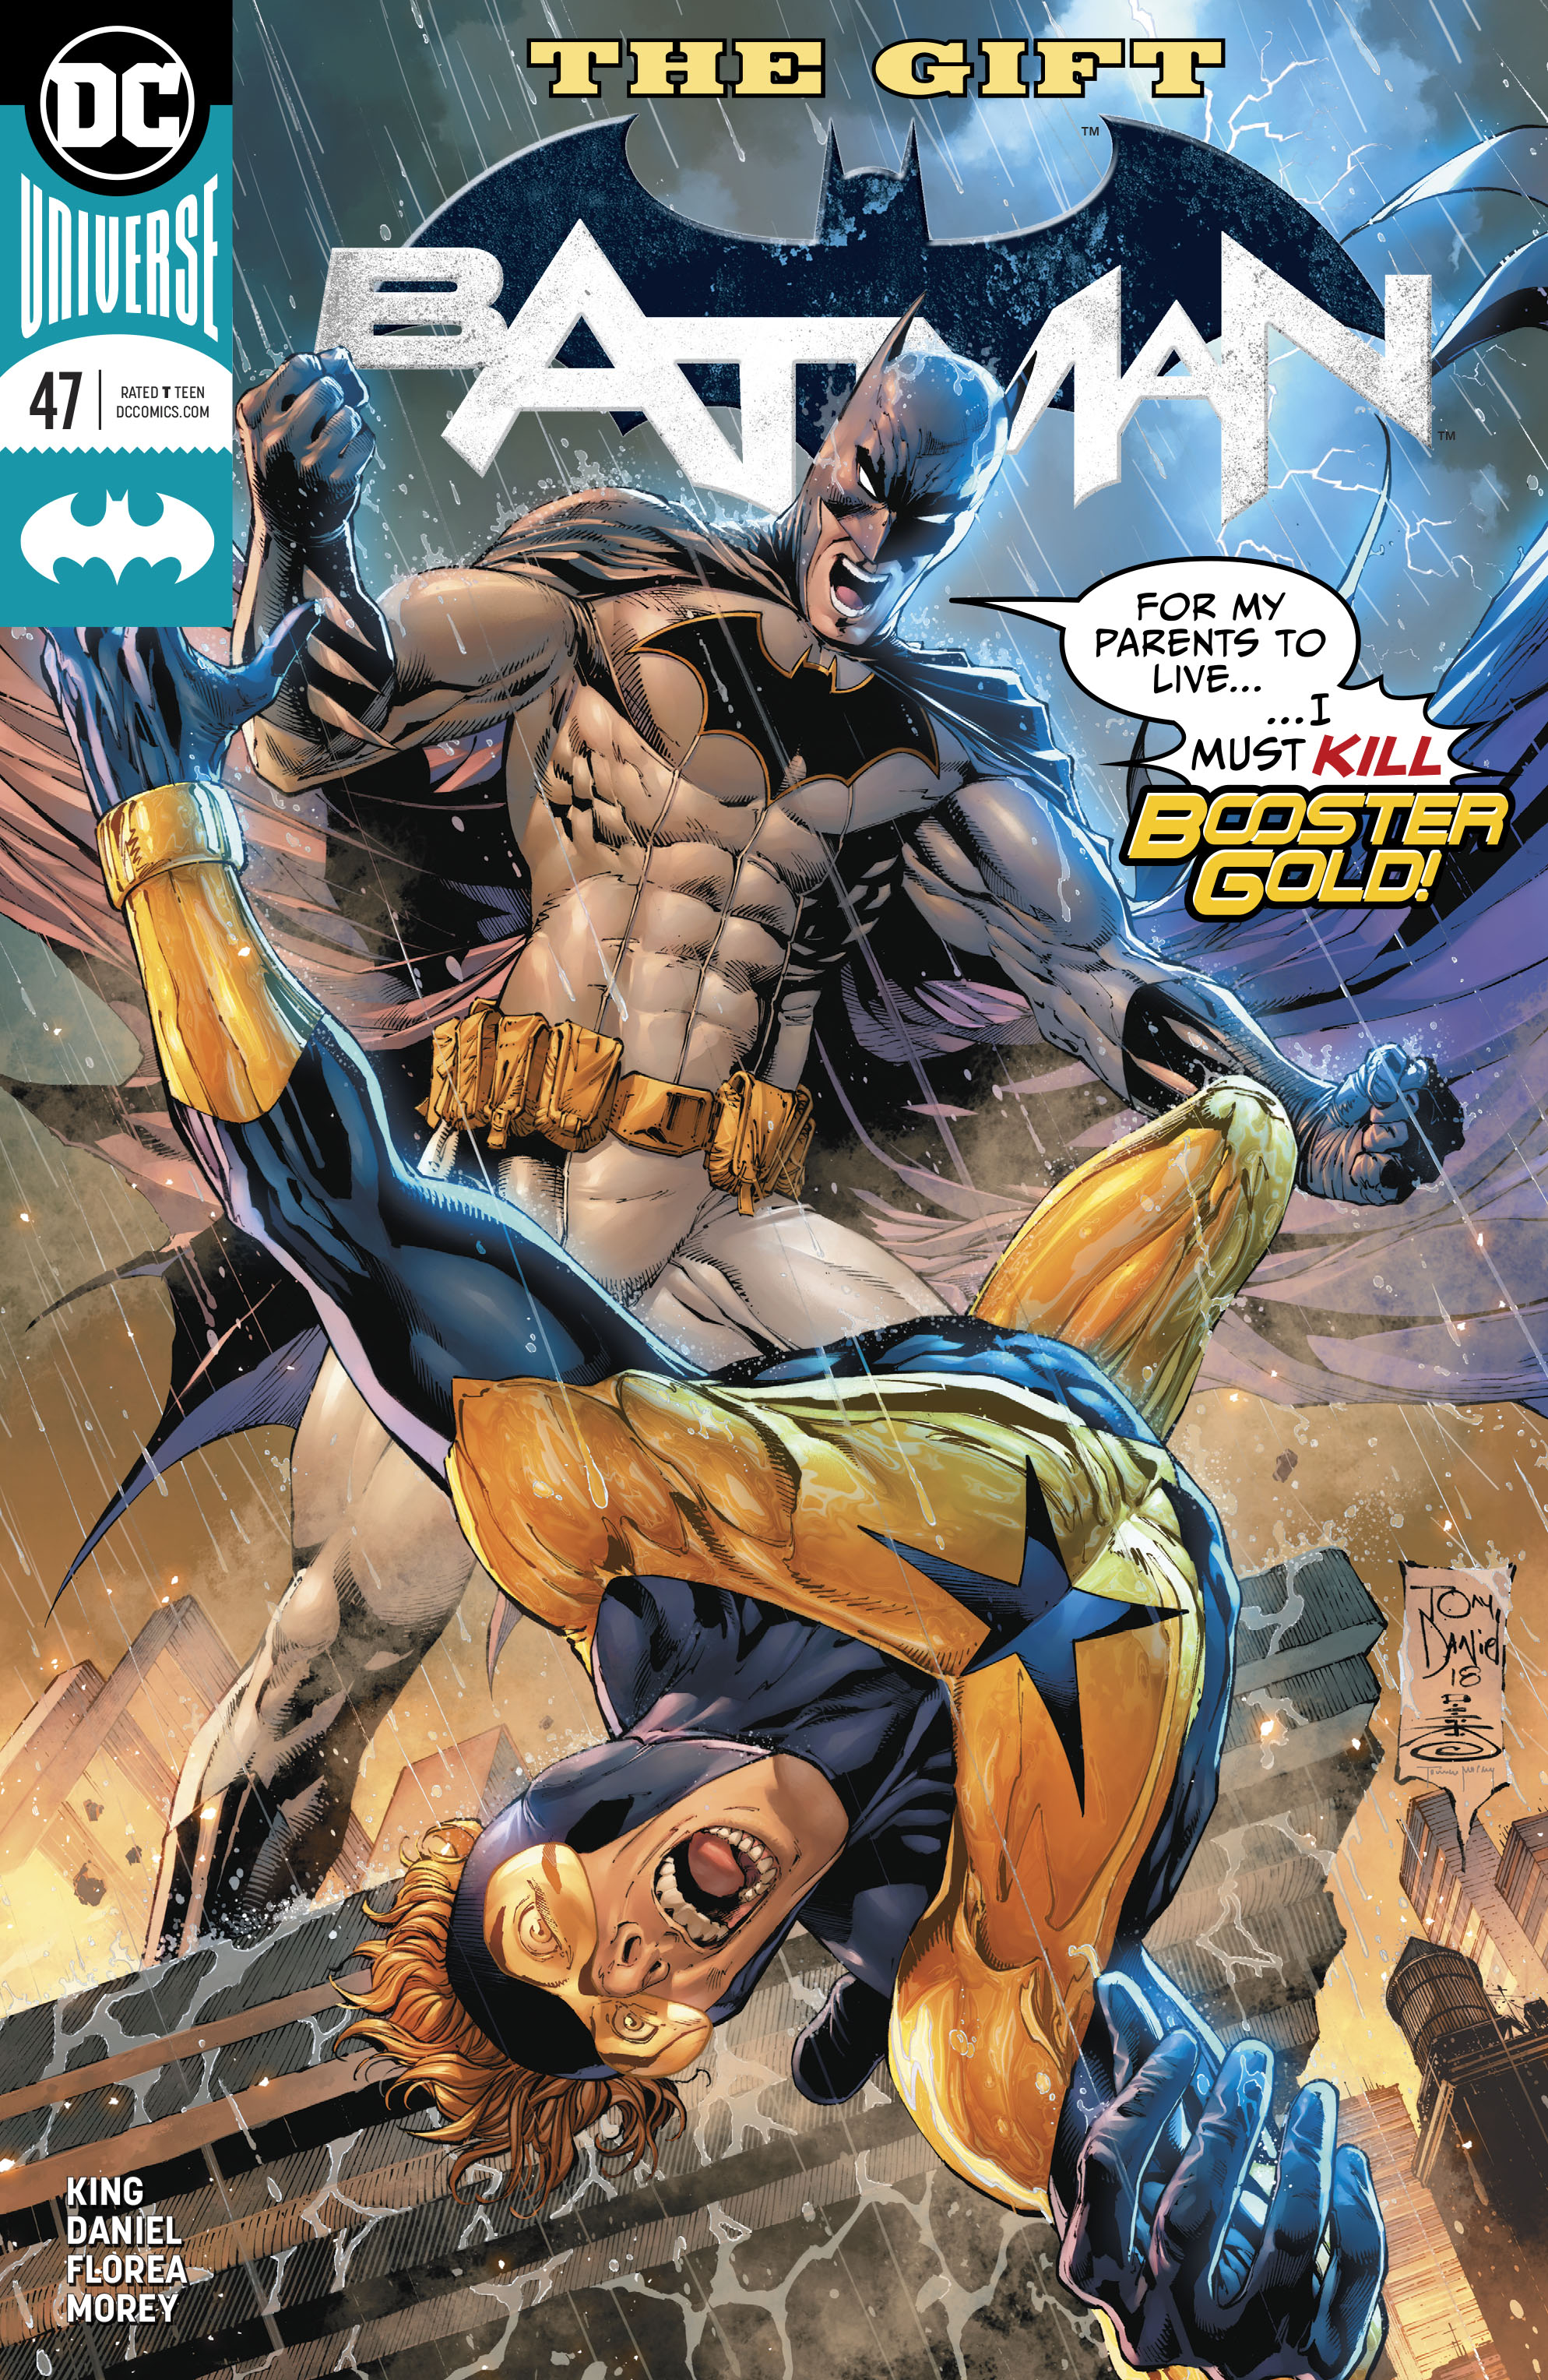 Batmans Booster Gold Arc The Good The Bad The